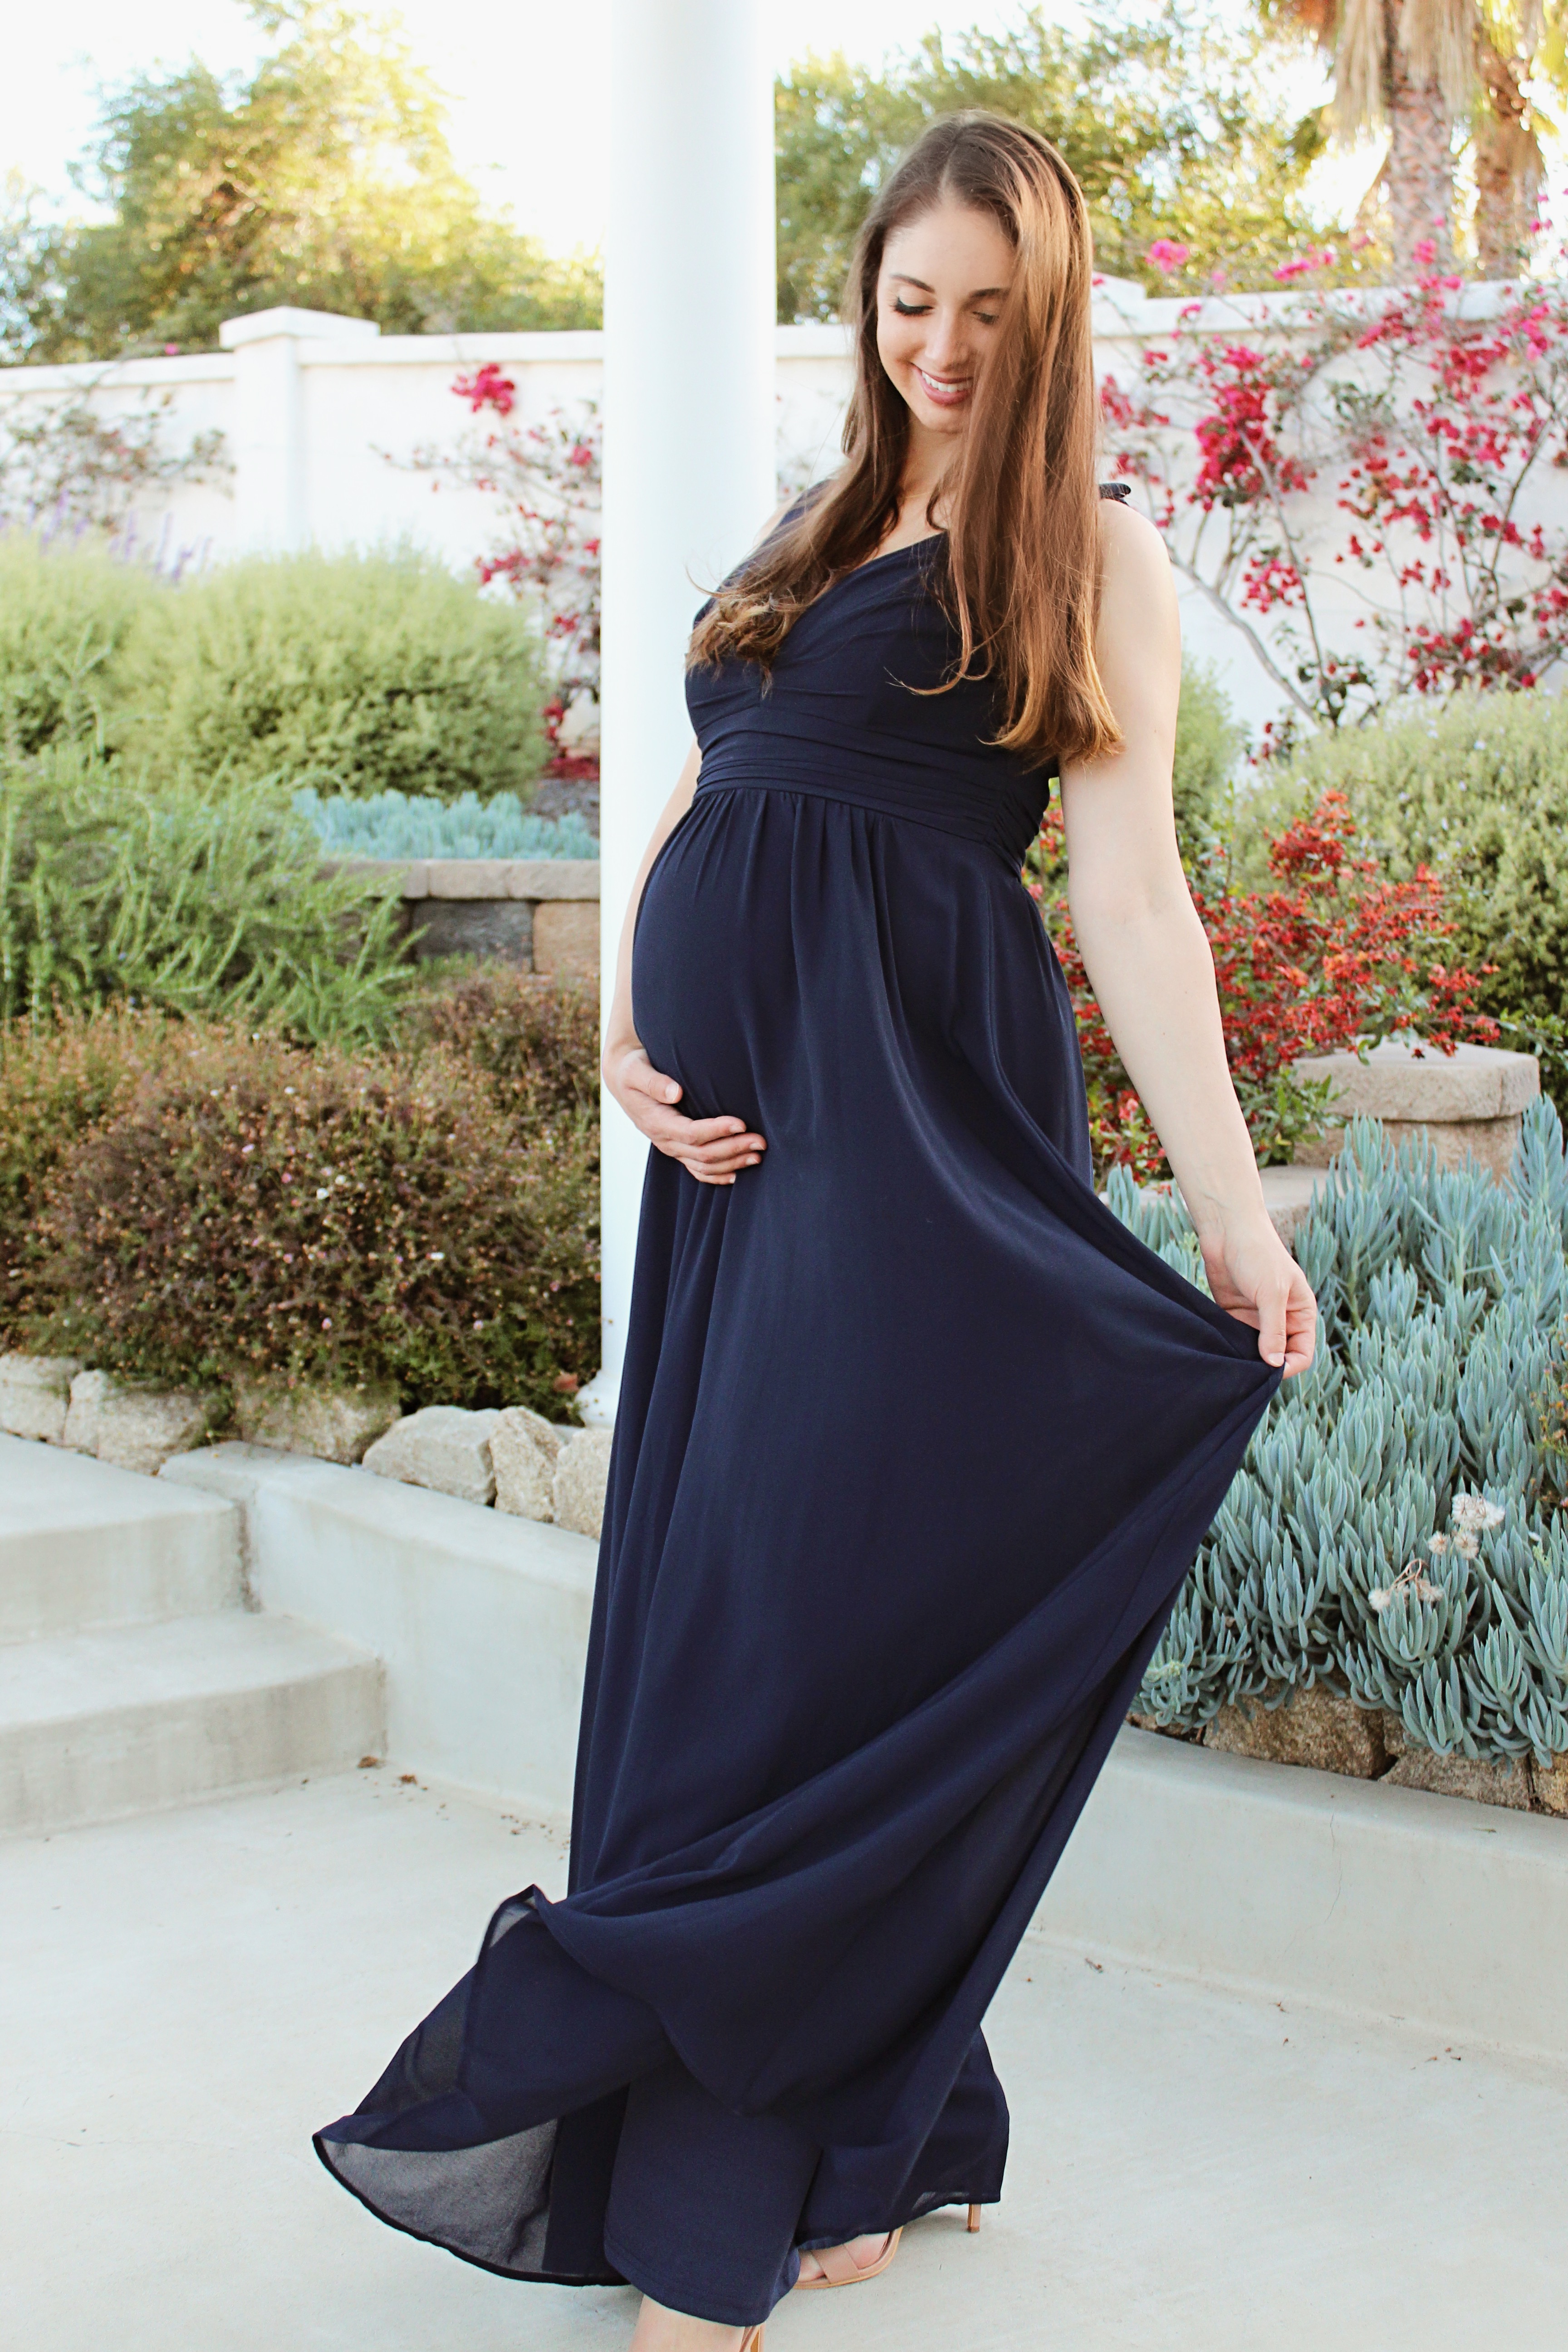 Top more than 163 elegant maternity gowns